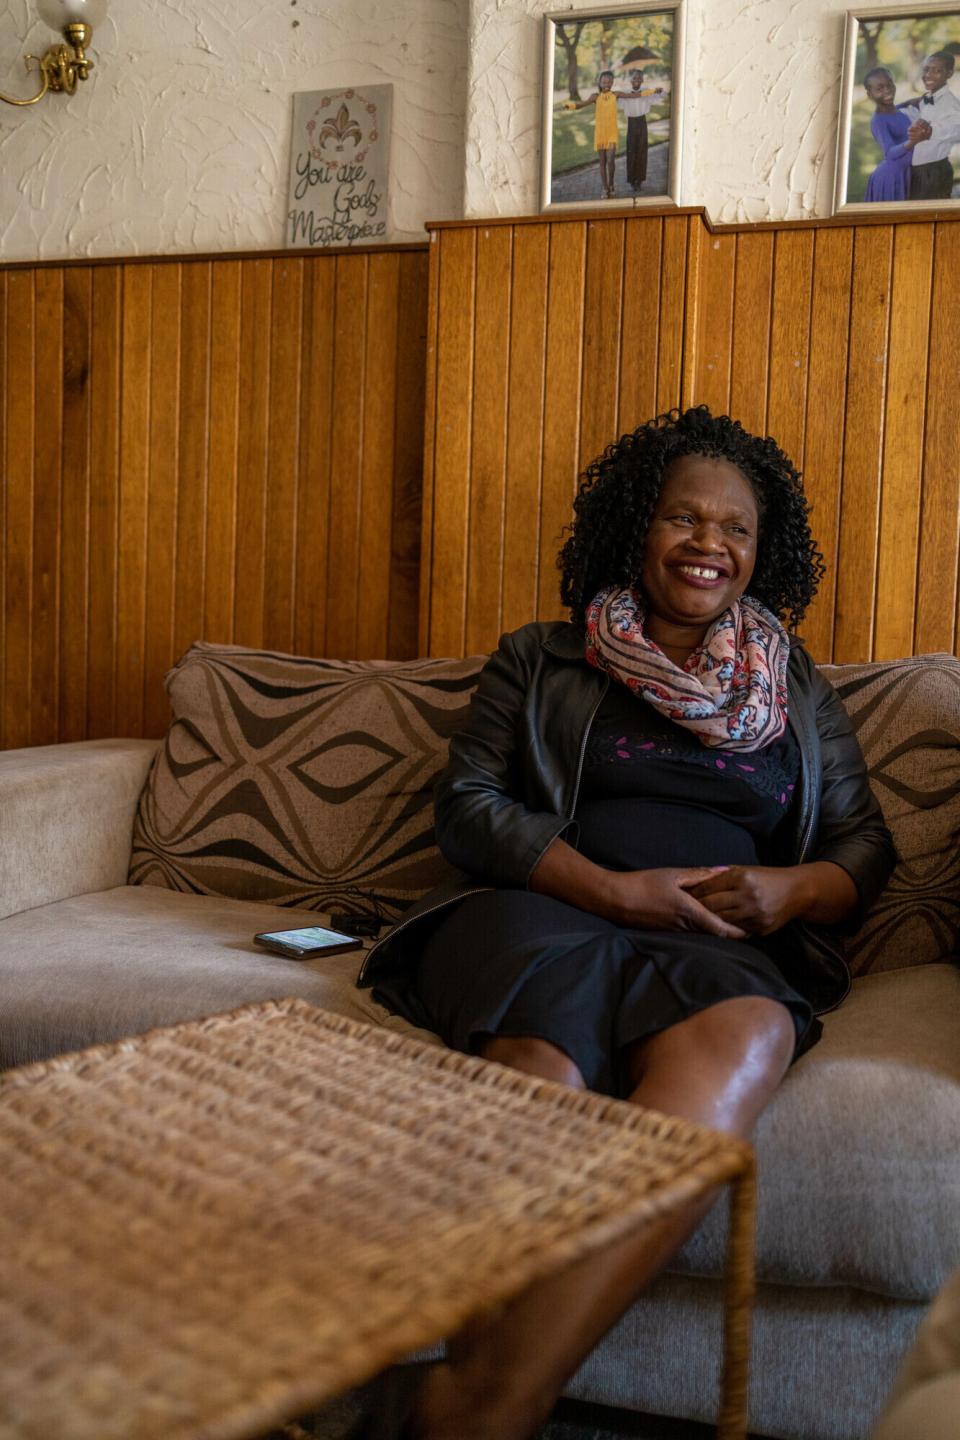 A Zimbabwean woman sitting on a couch